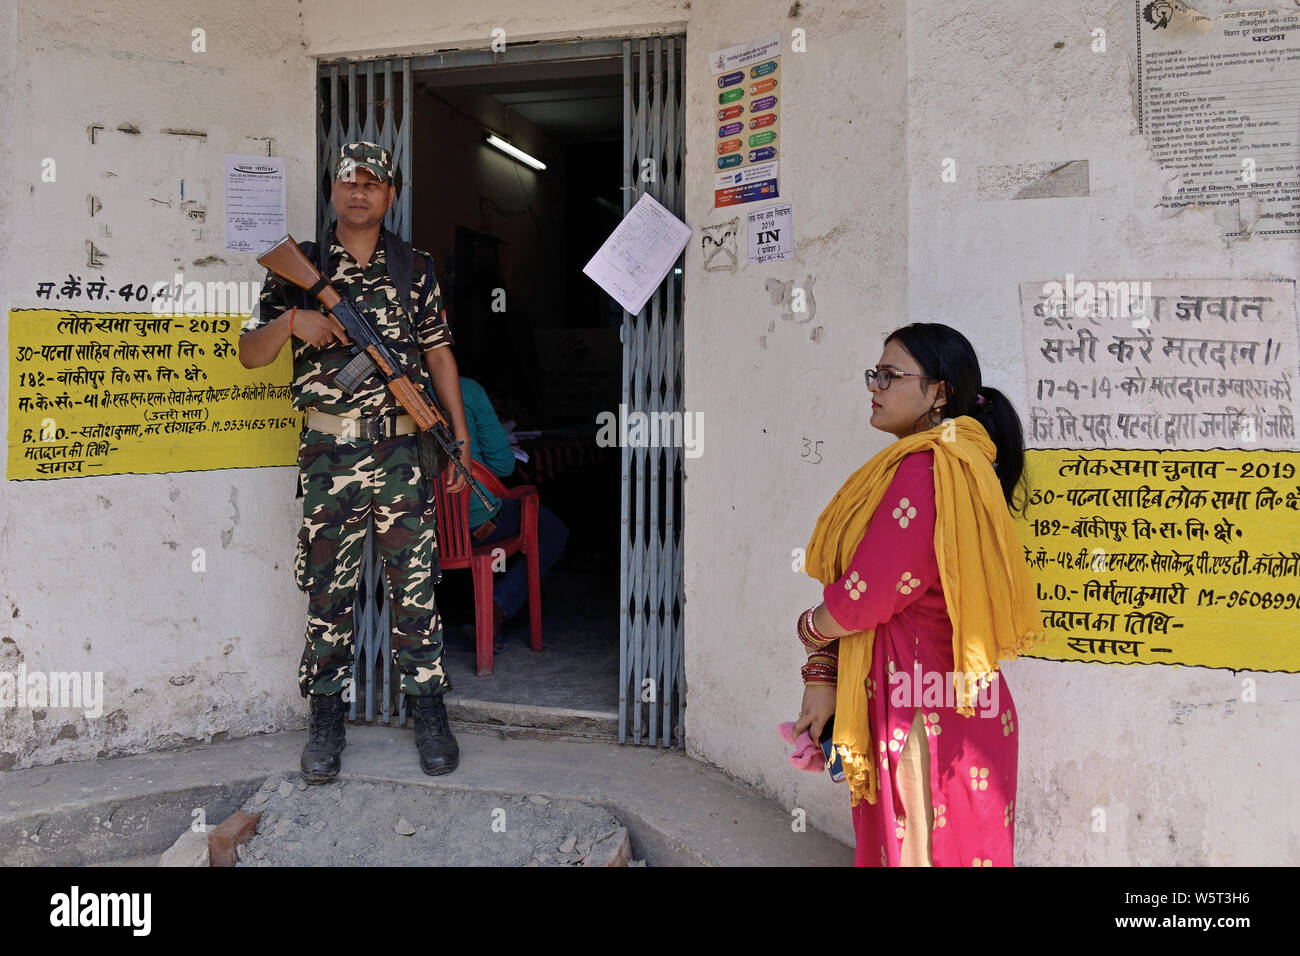 Patna, Bihar, India - May 19, 2019: A security personnel guards the ballot room while a voter awaits her turn outside the polling booth. Stock Photo